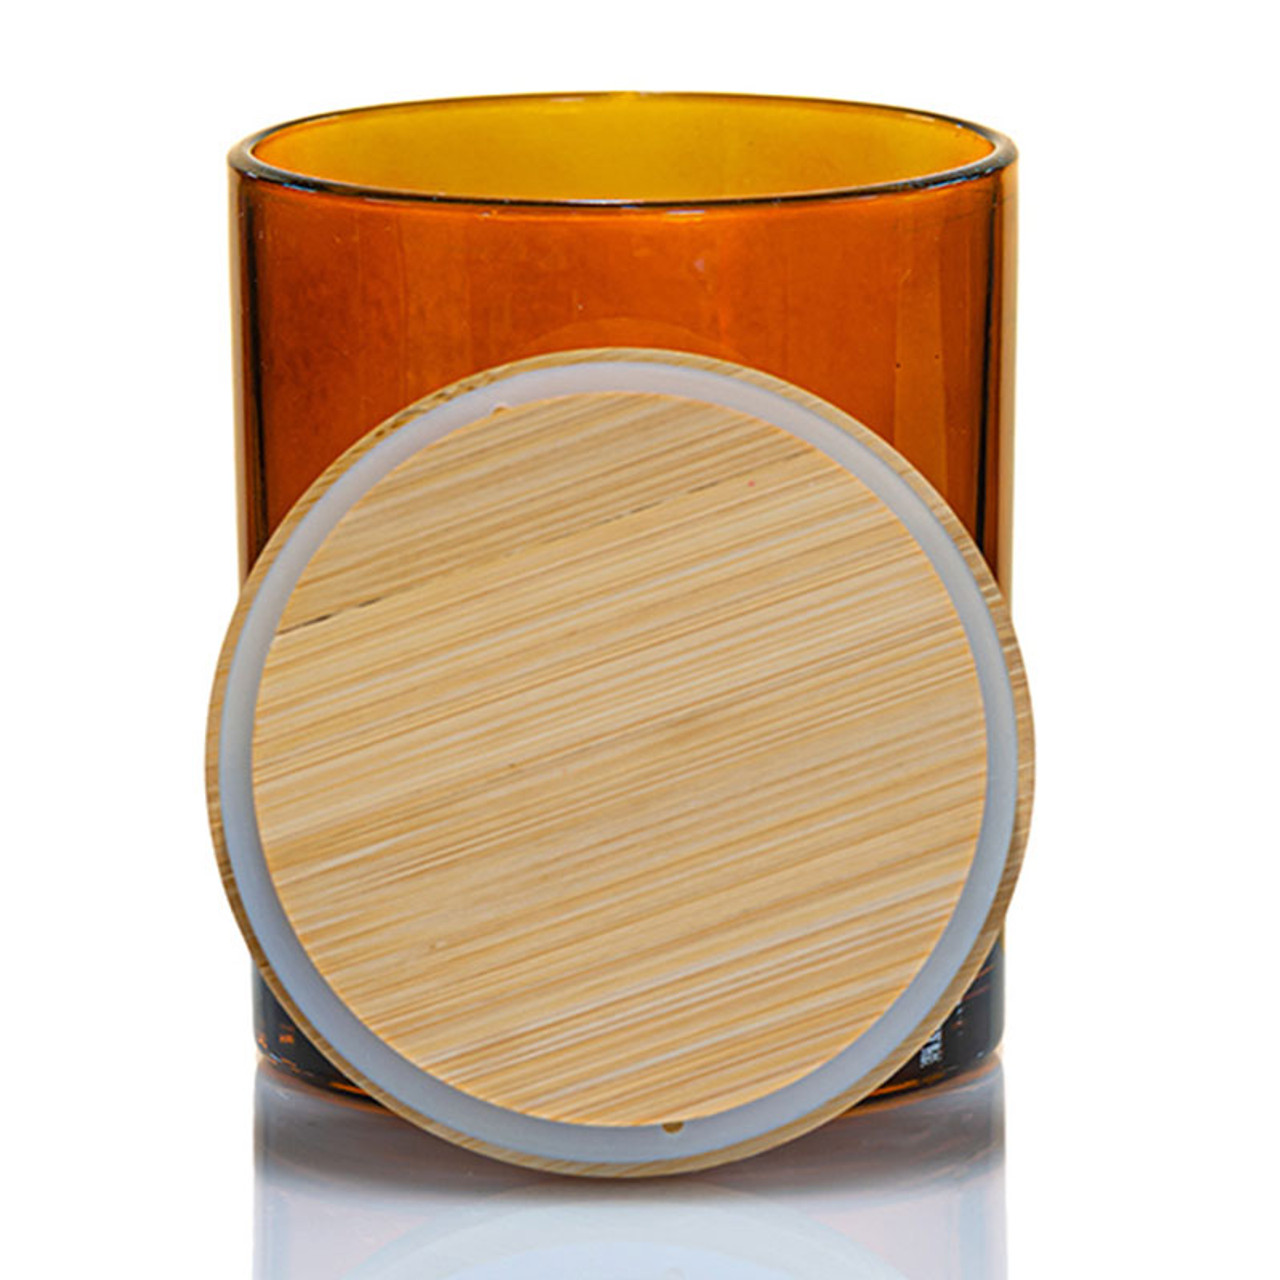 Amber Colored Candle Jar - 14.5 oz with Bamboo Lid | 12 Pack